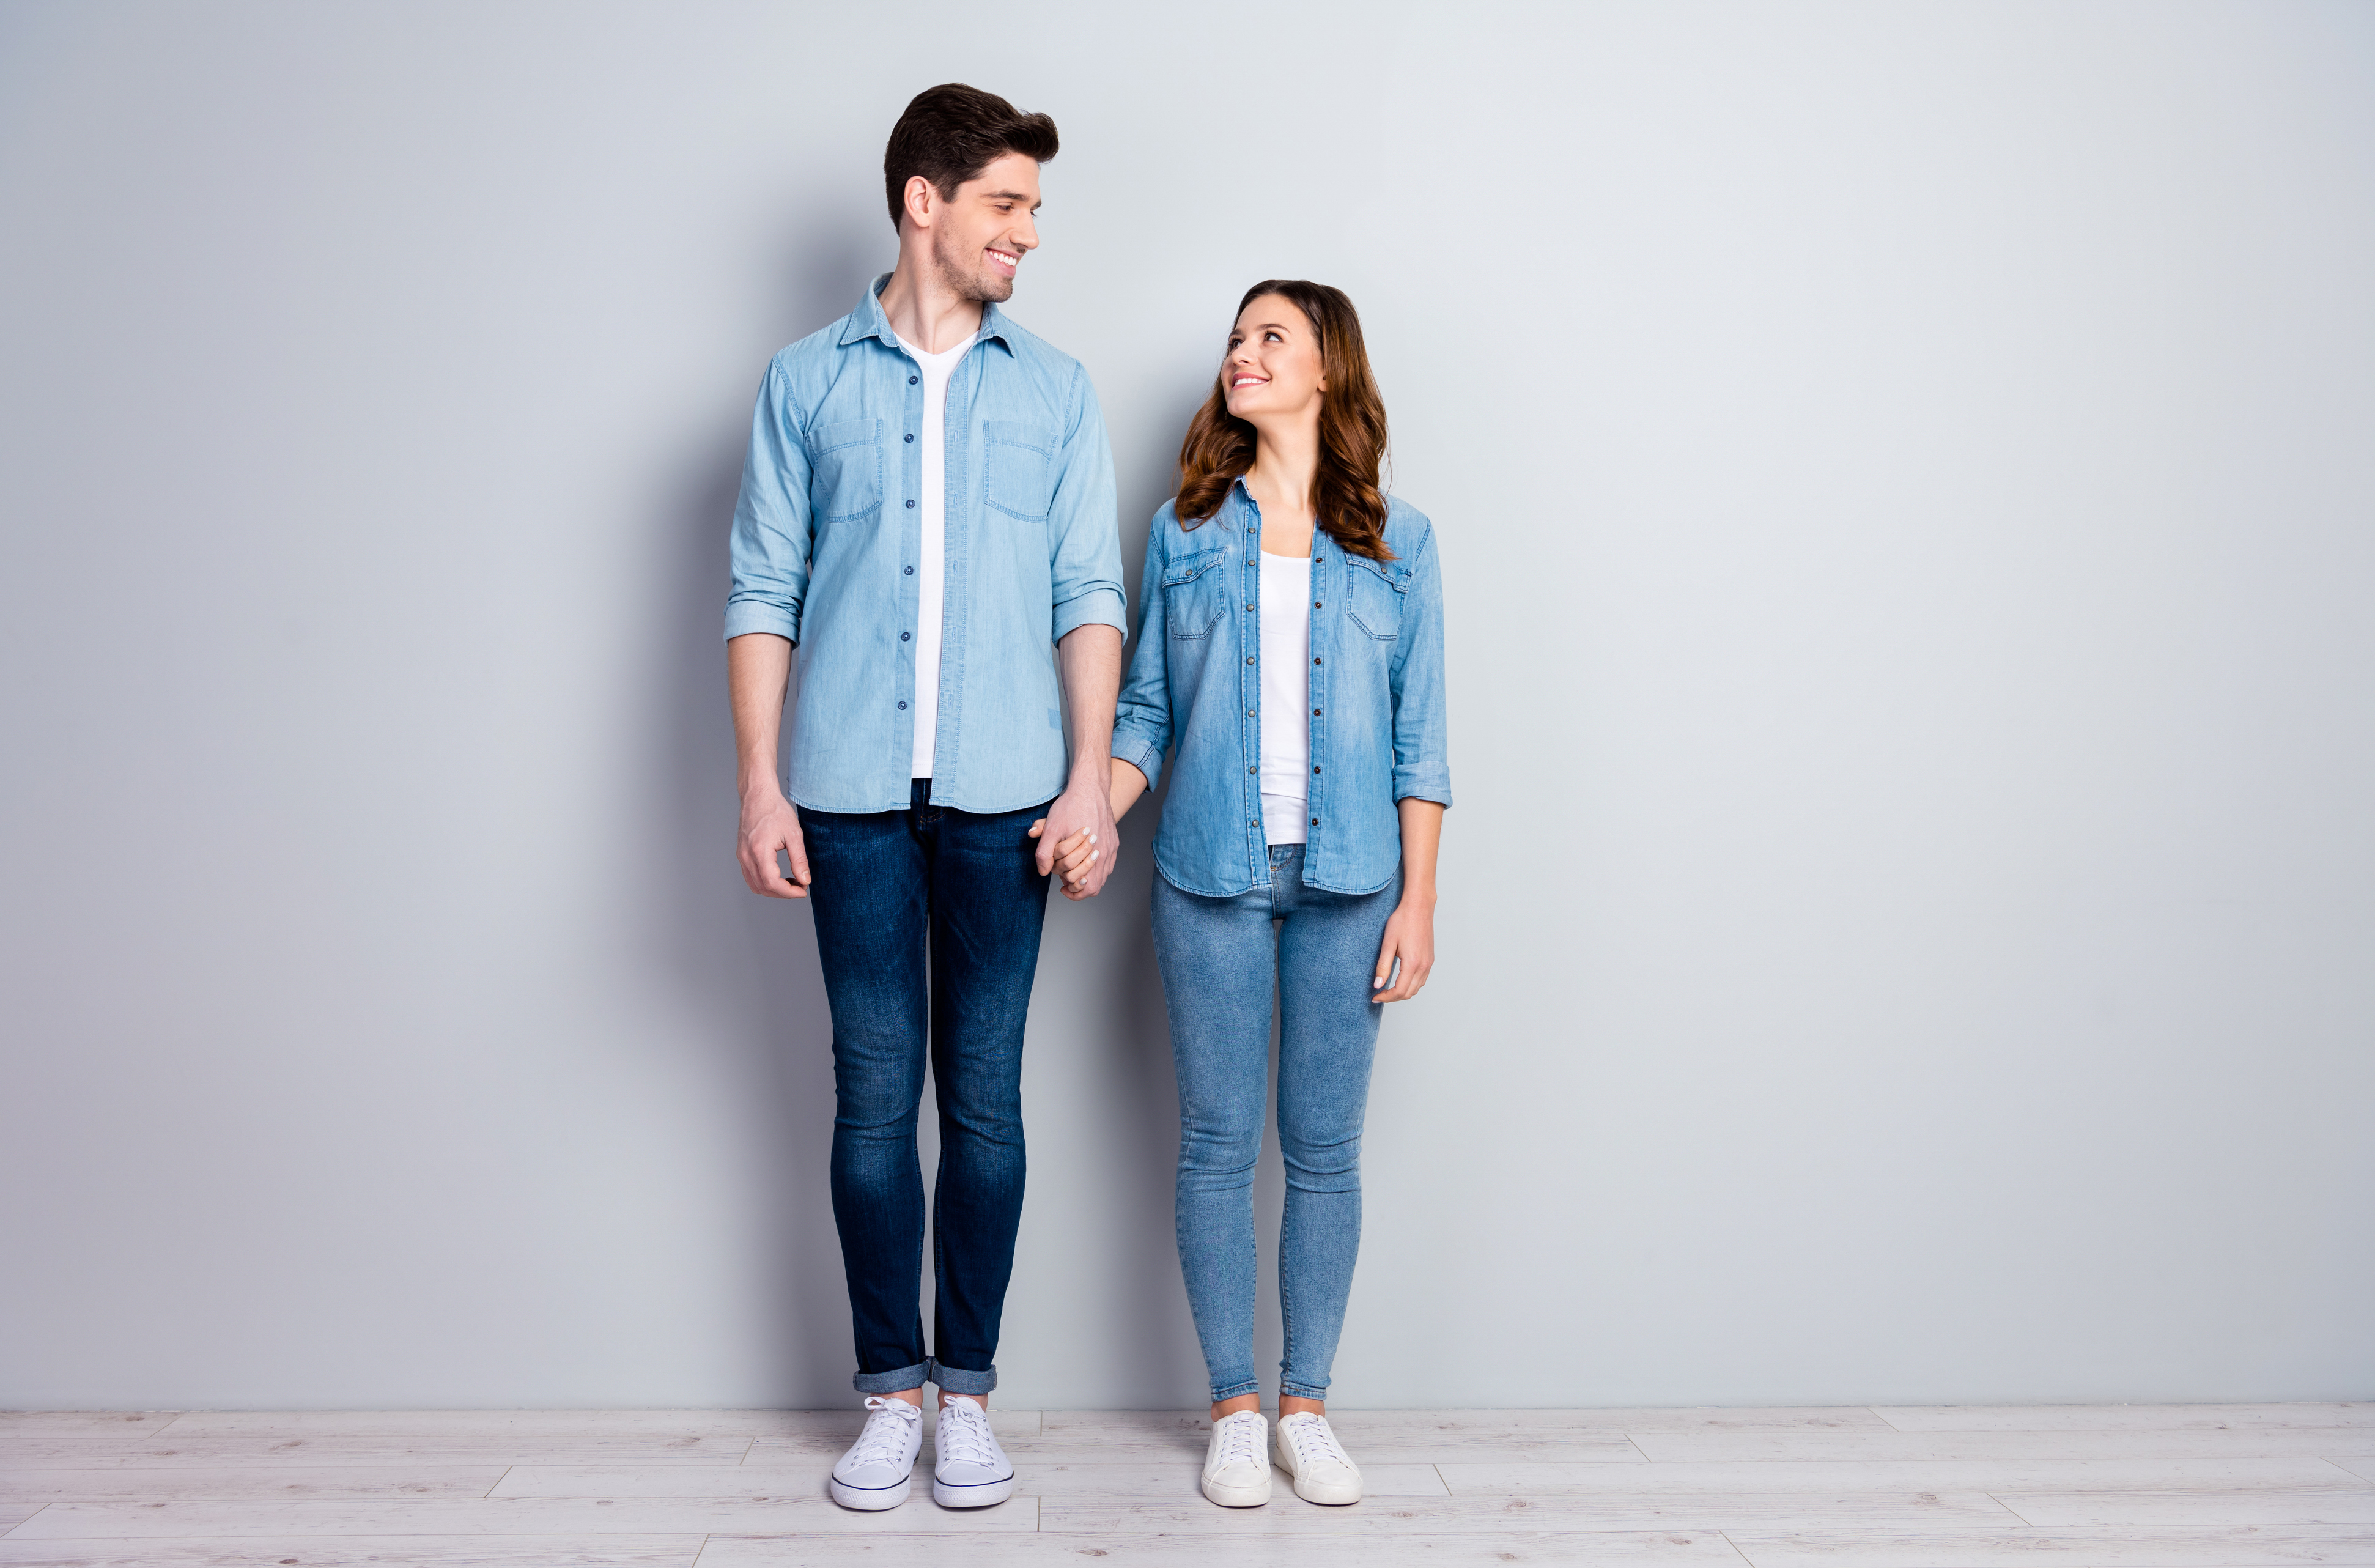 Does A Person's Height Matter In Attracting A Partner For Dating?